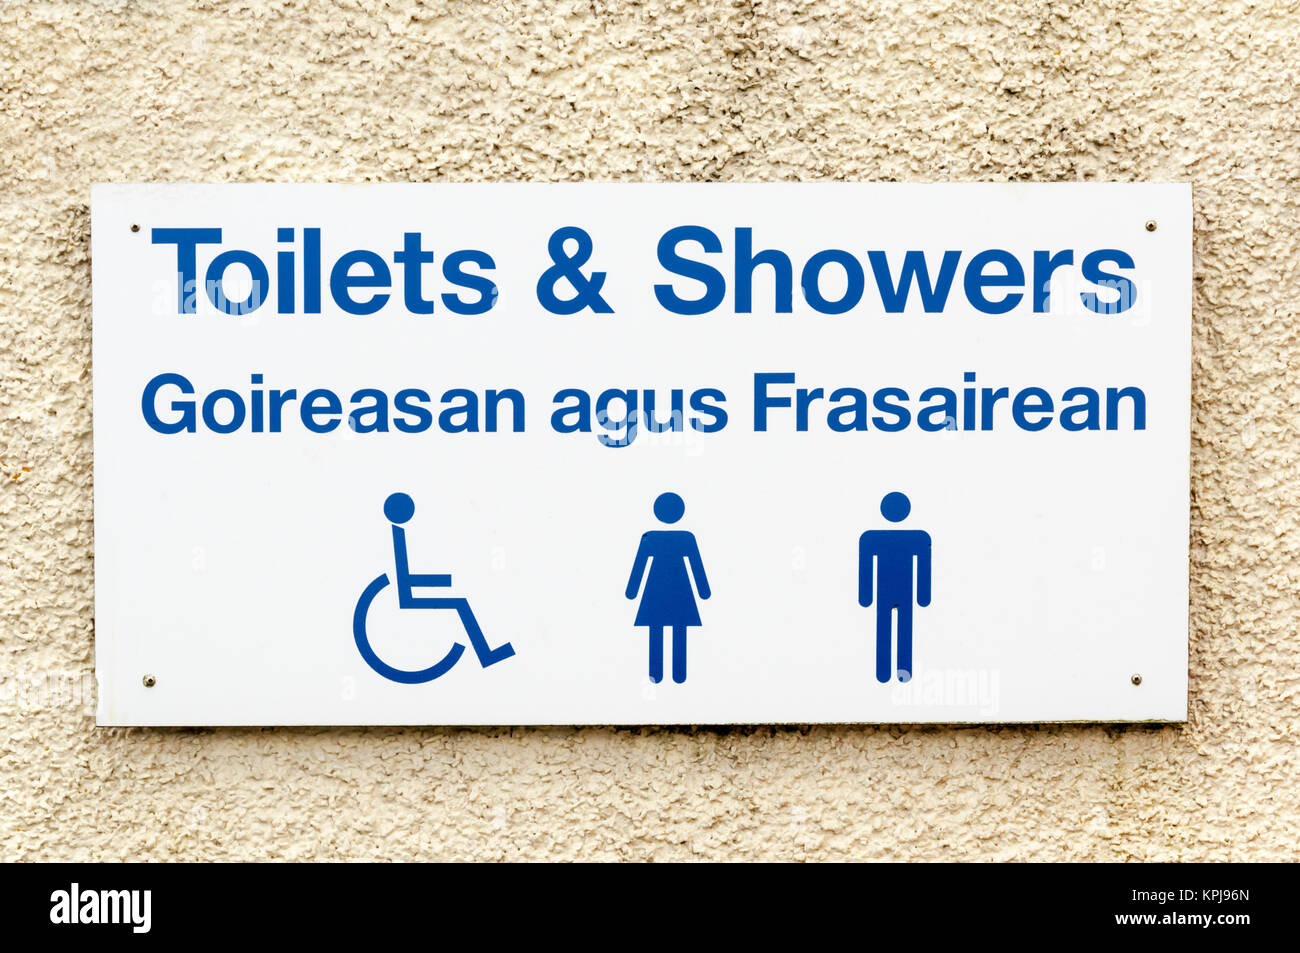 Toilets & Showers sign in English and Gaelic on Scalpay in the Outer Hebrides. Stock Photo